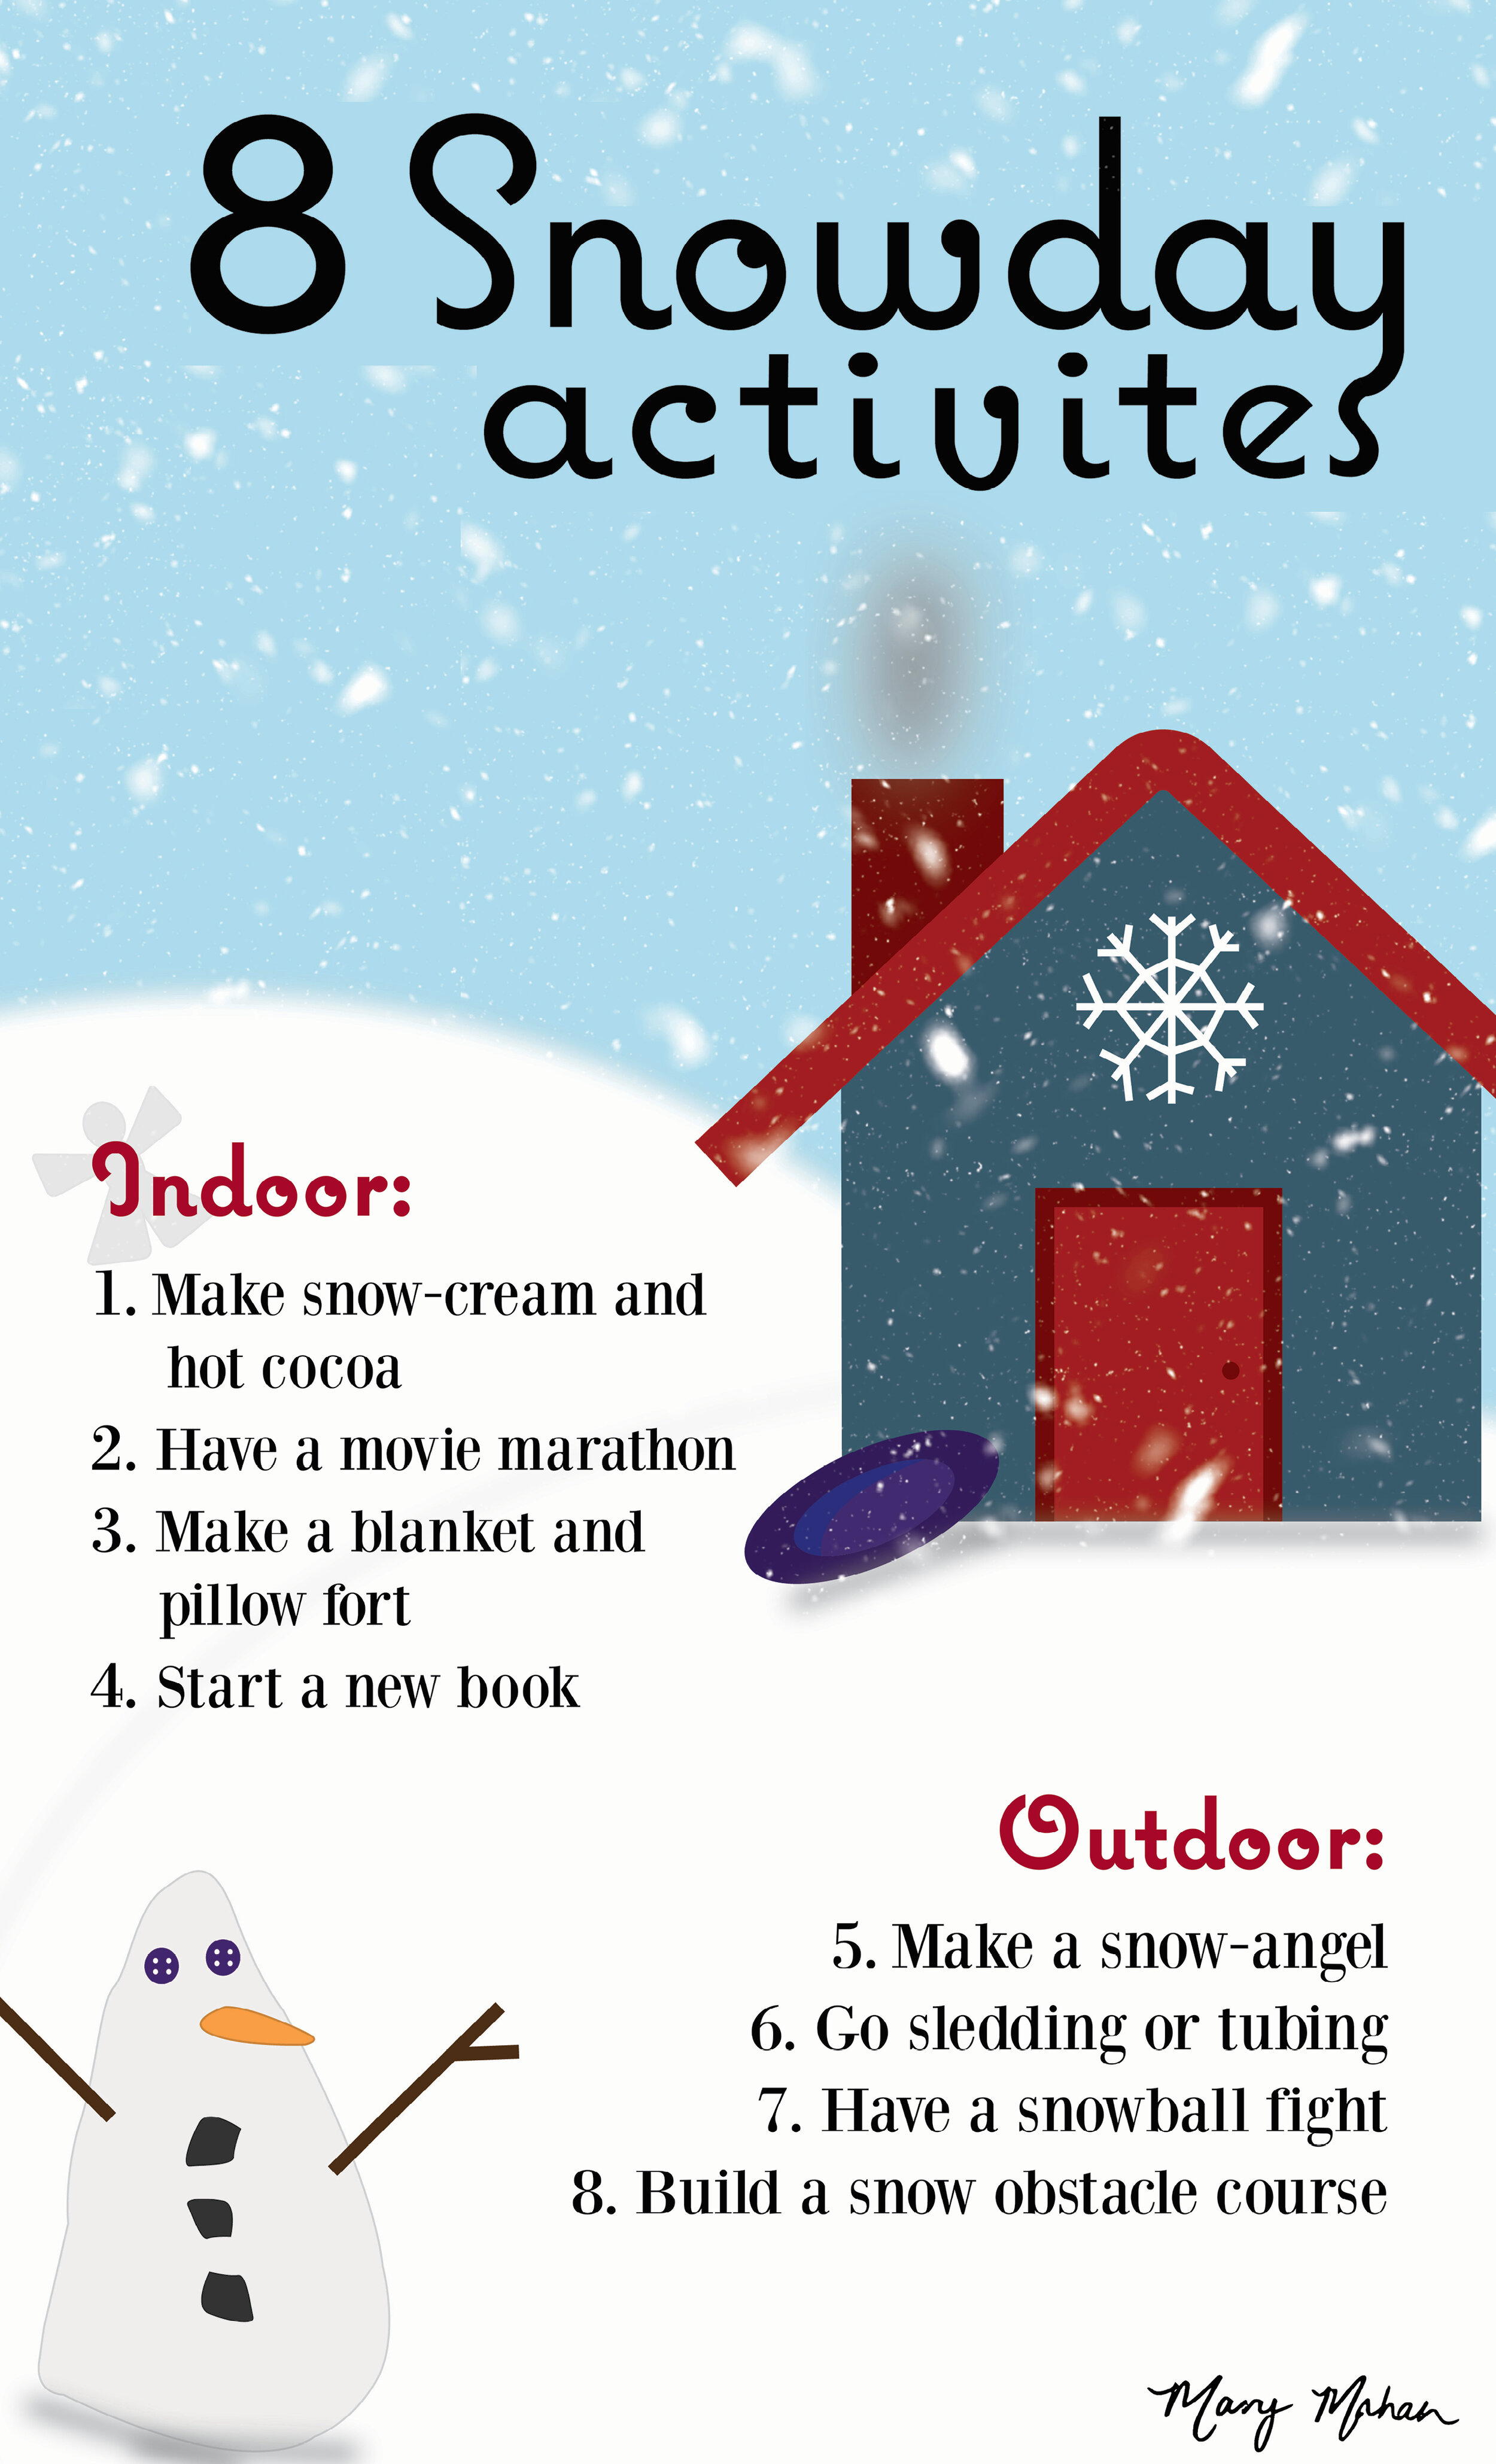 Since we are in the midst of snow season, here are some fun activities to do on a snow day.